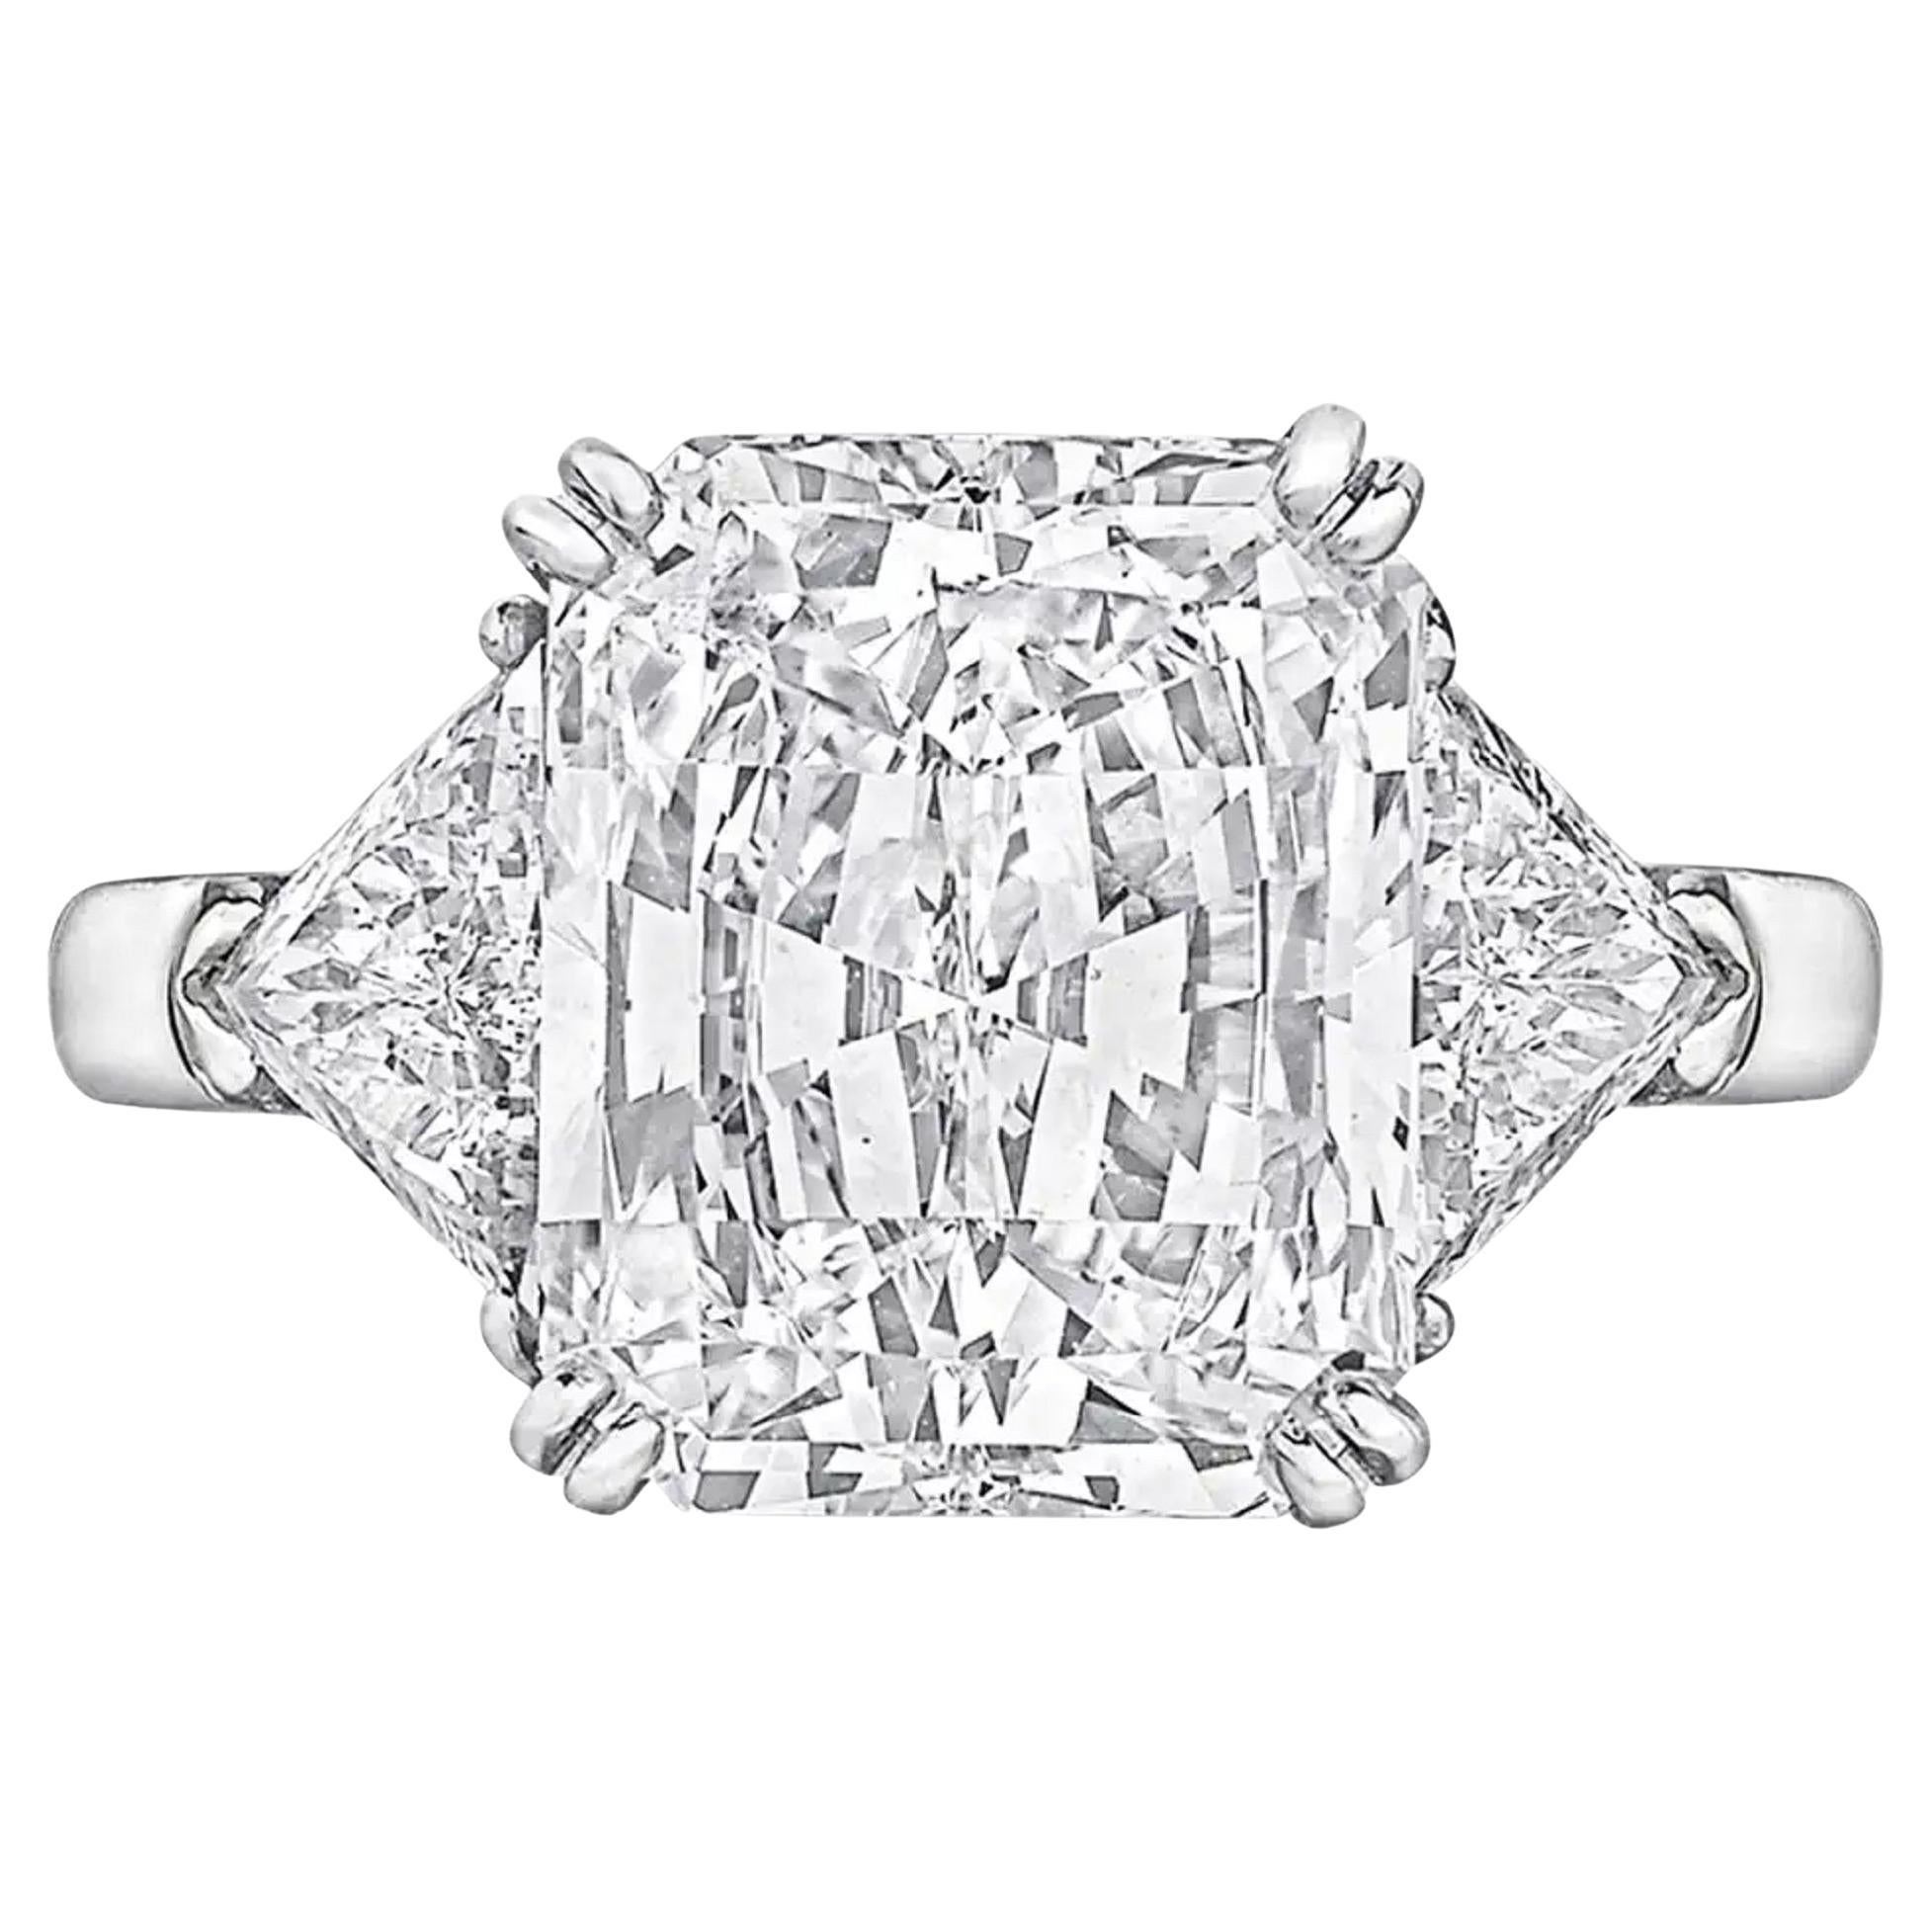 GIA Certified 4 Carat Radiant Cut Diamond Ring E Color